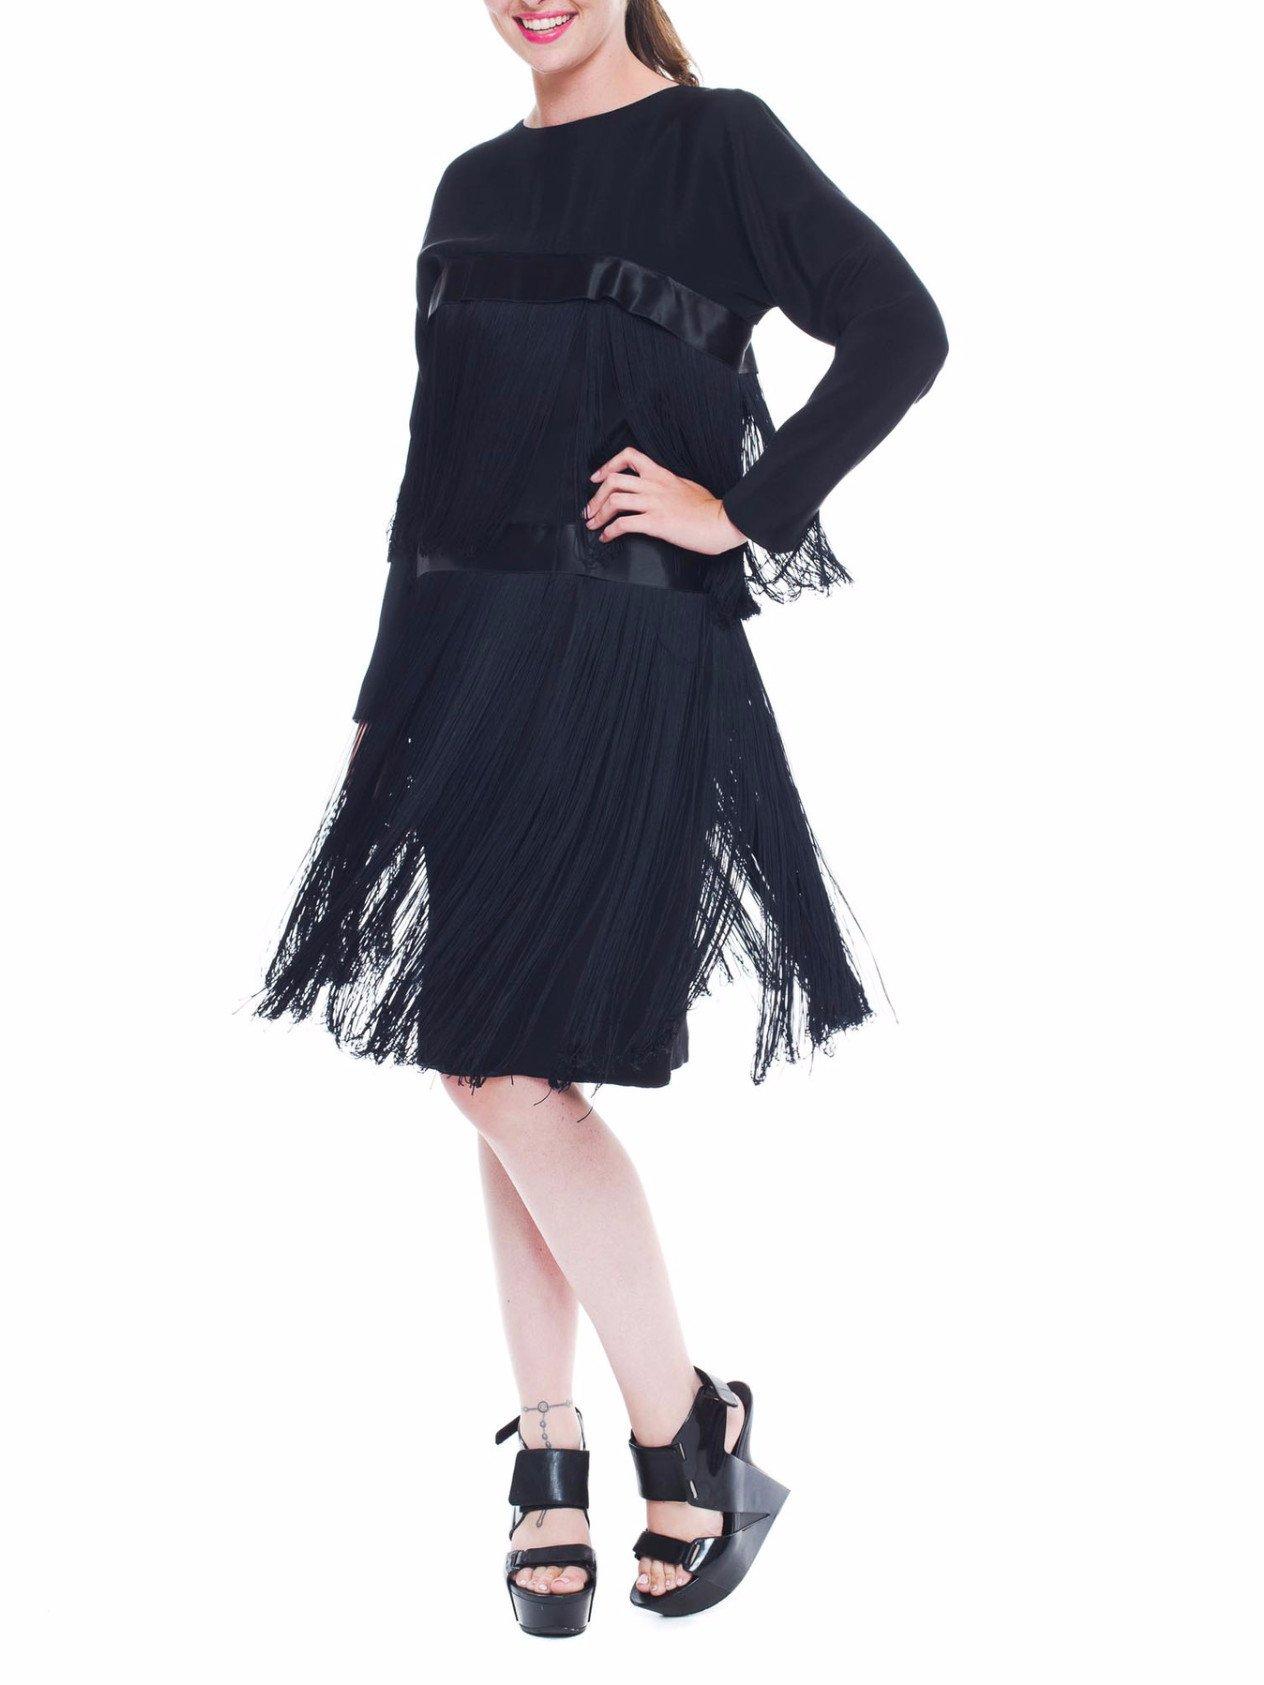 Demi Couture construction with an internal boned corset and waist stays. Very high quality silk and rare extra long fringe.  1980S PETER KEPPLER Black Silk Faille Long Sleeve Fringed Cocktail Dress 